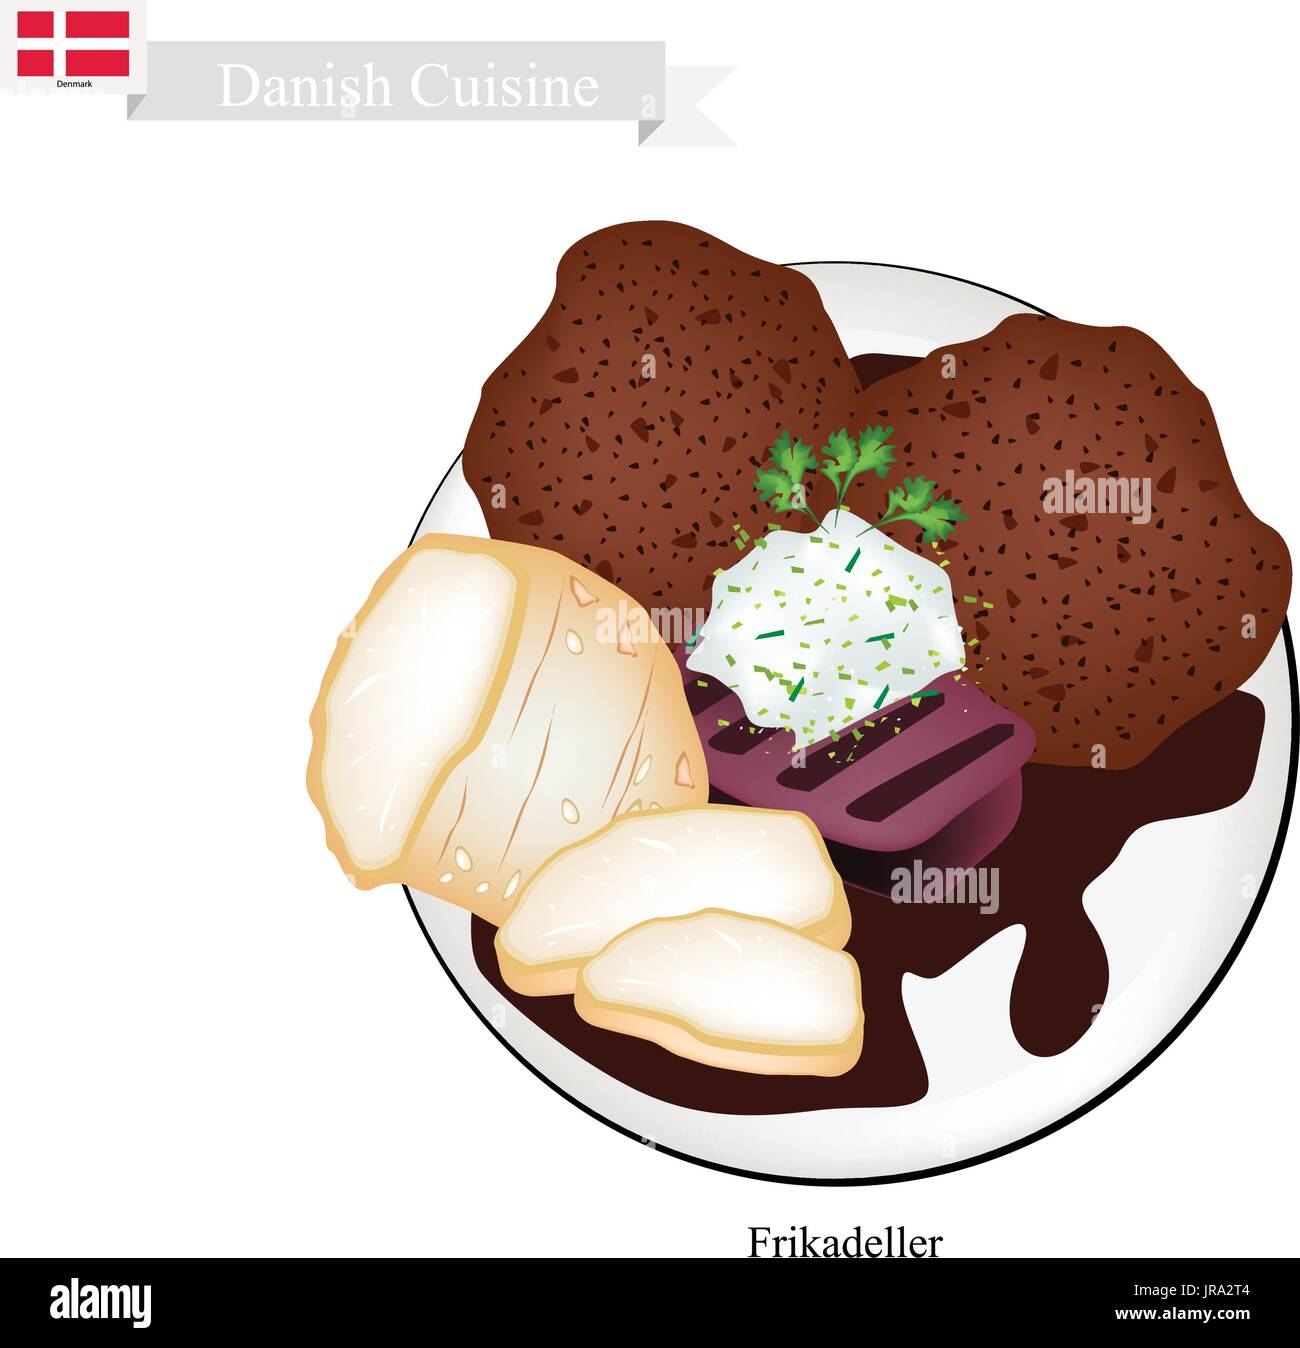 Danish Cuisine, Illustration of Frikadeller or Traditional Pan Fried Ground Beef Patty Served with Boiled Potatoes and Gravy or Creamed Cabbage. One o Stock Vector